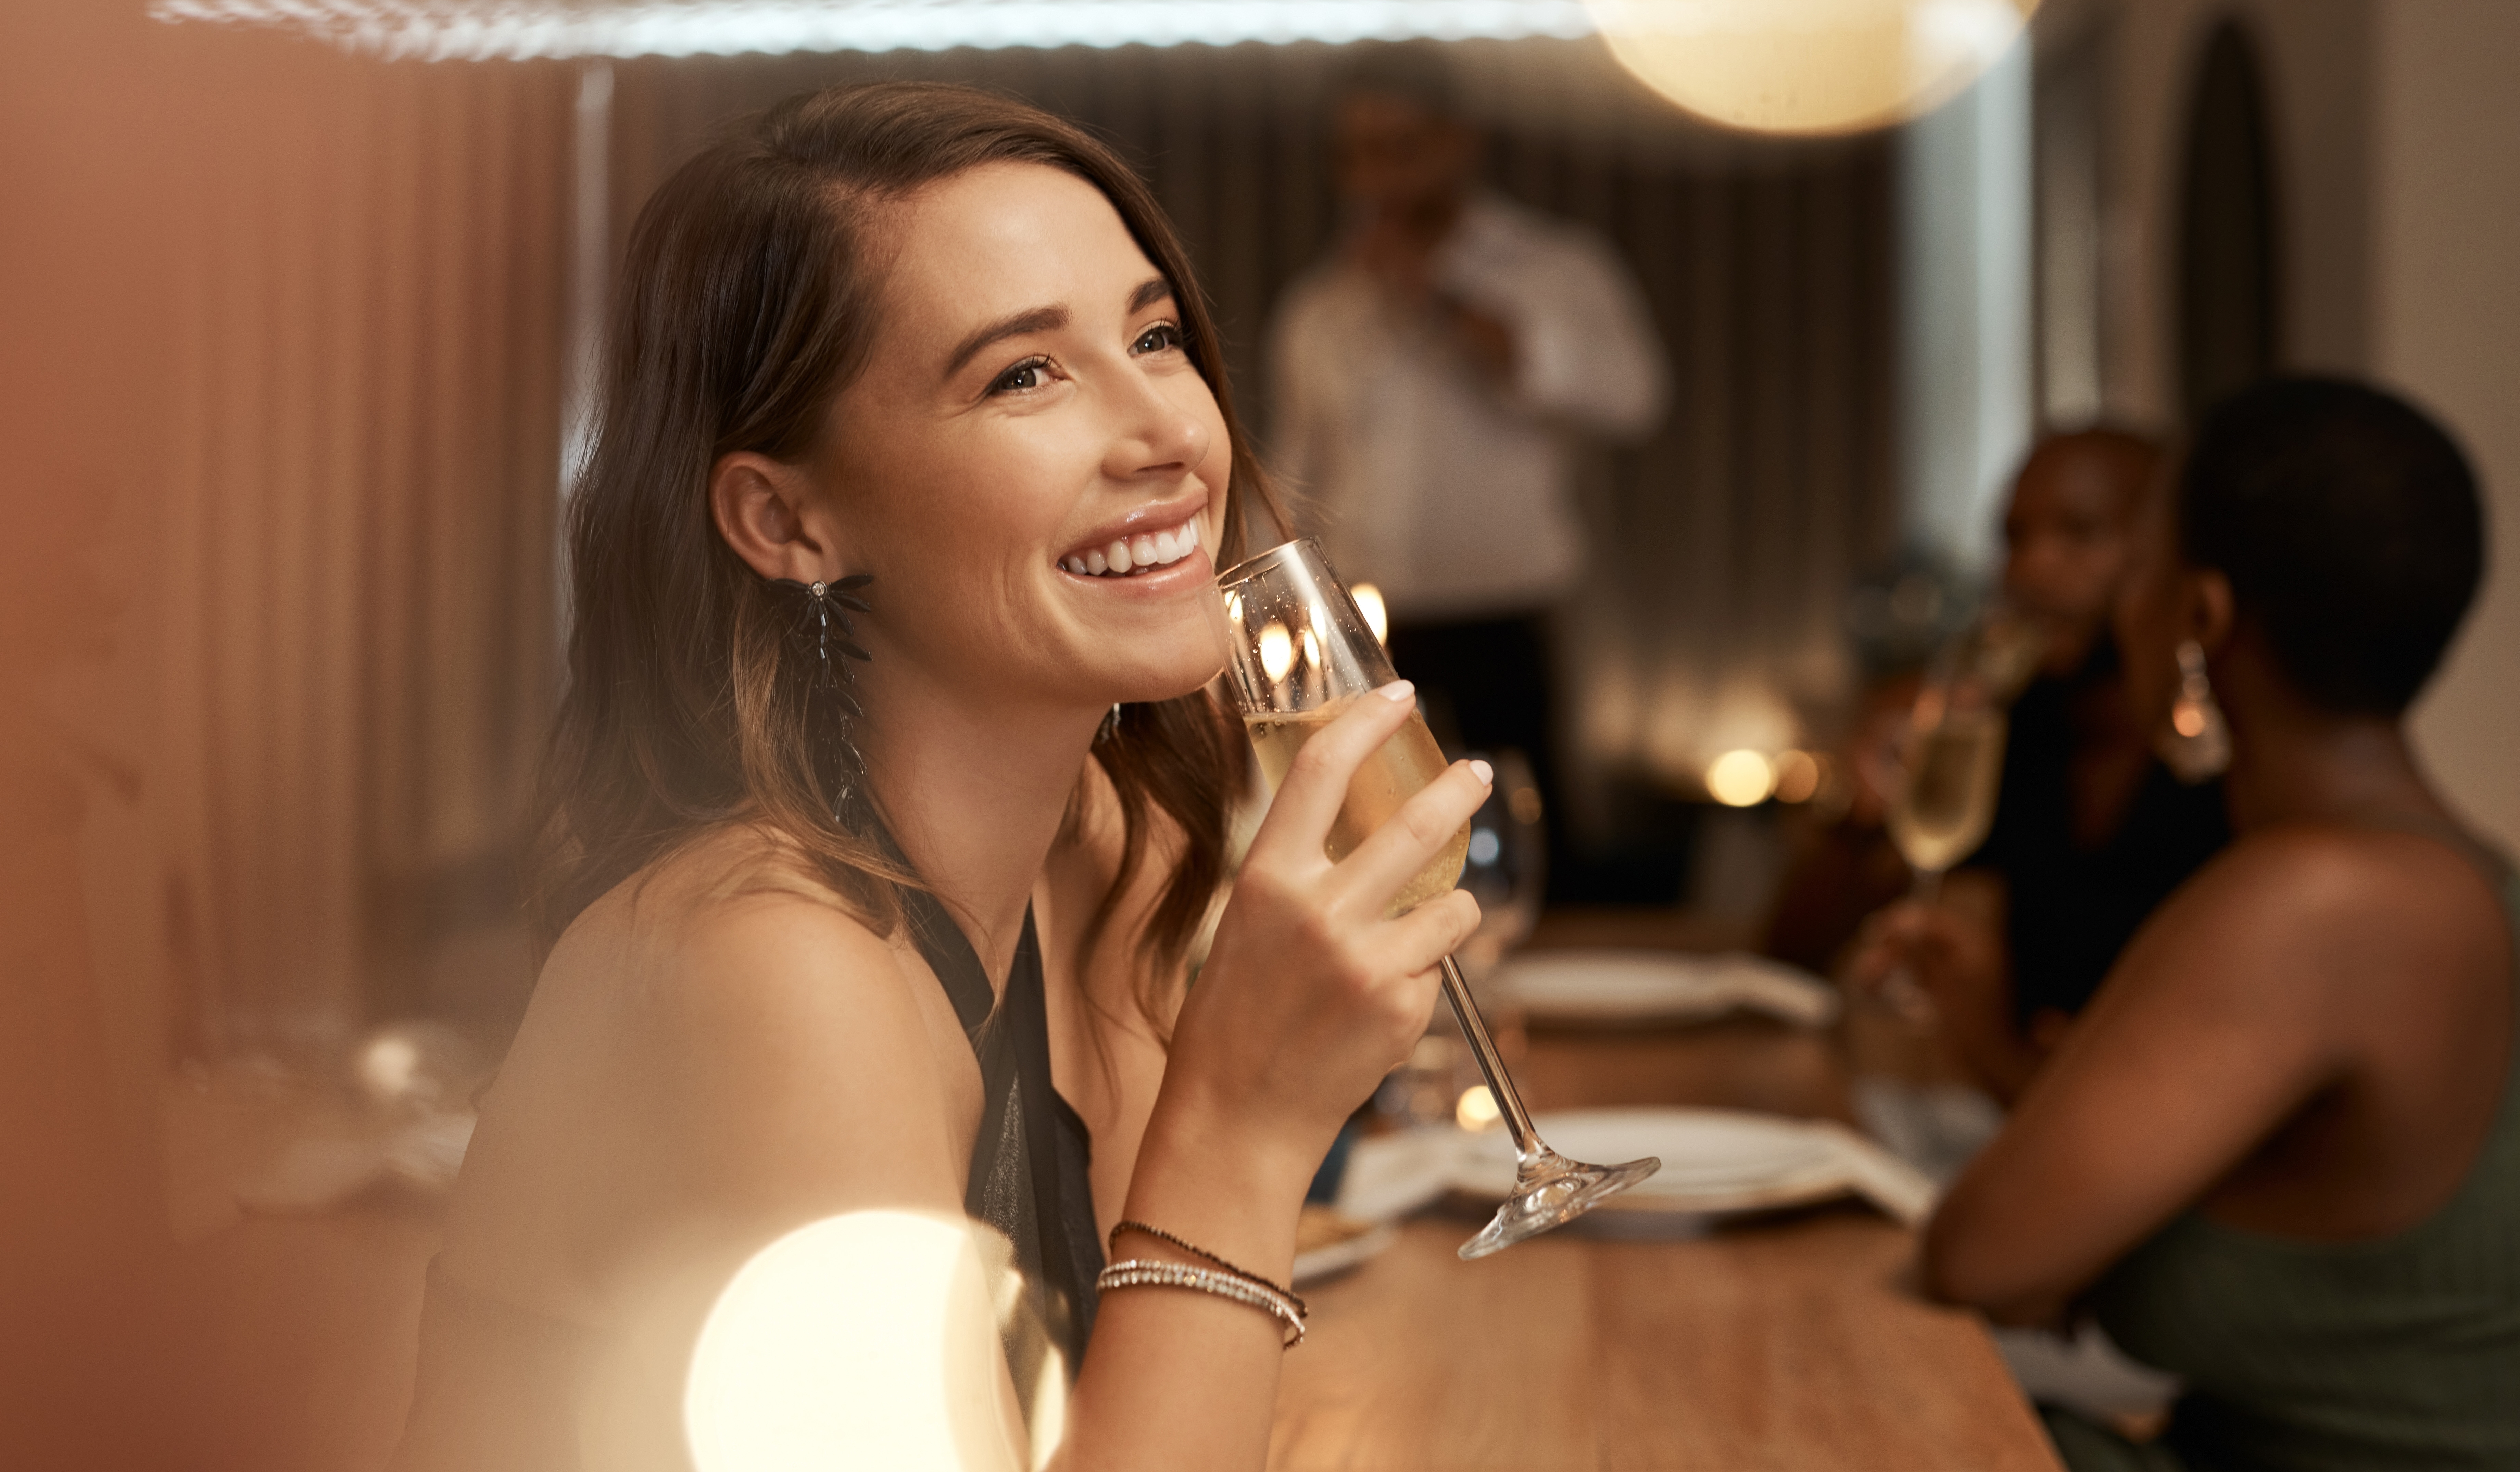 Woman holding a glass of champagne in a restaurant | Source: Shutterstock